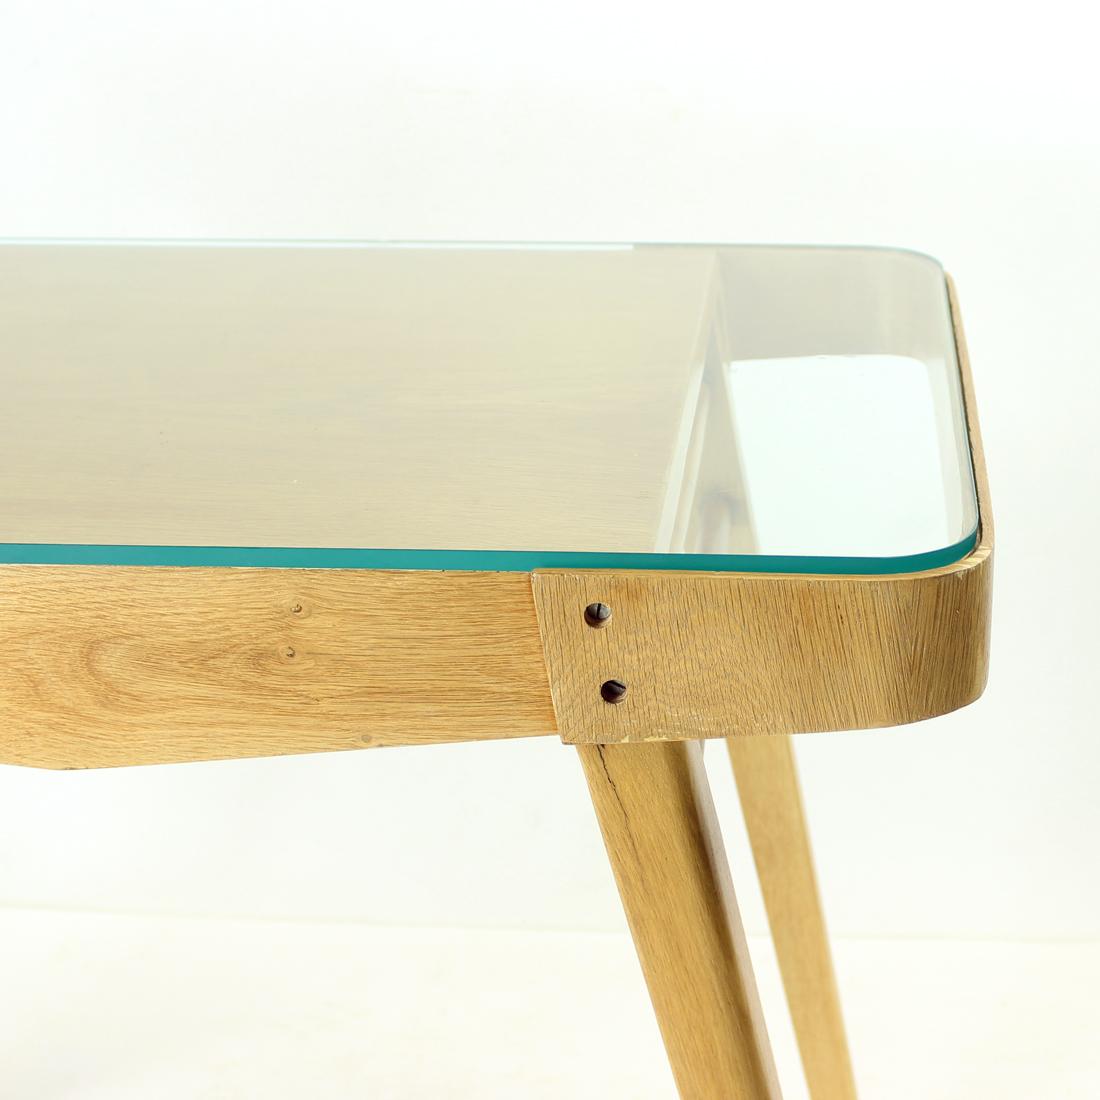 Mid-20th Century Midcentury Coffee Table in Oak and Glass, Czechoslovakia, 1960s For Sale